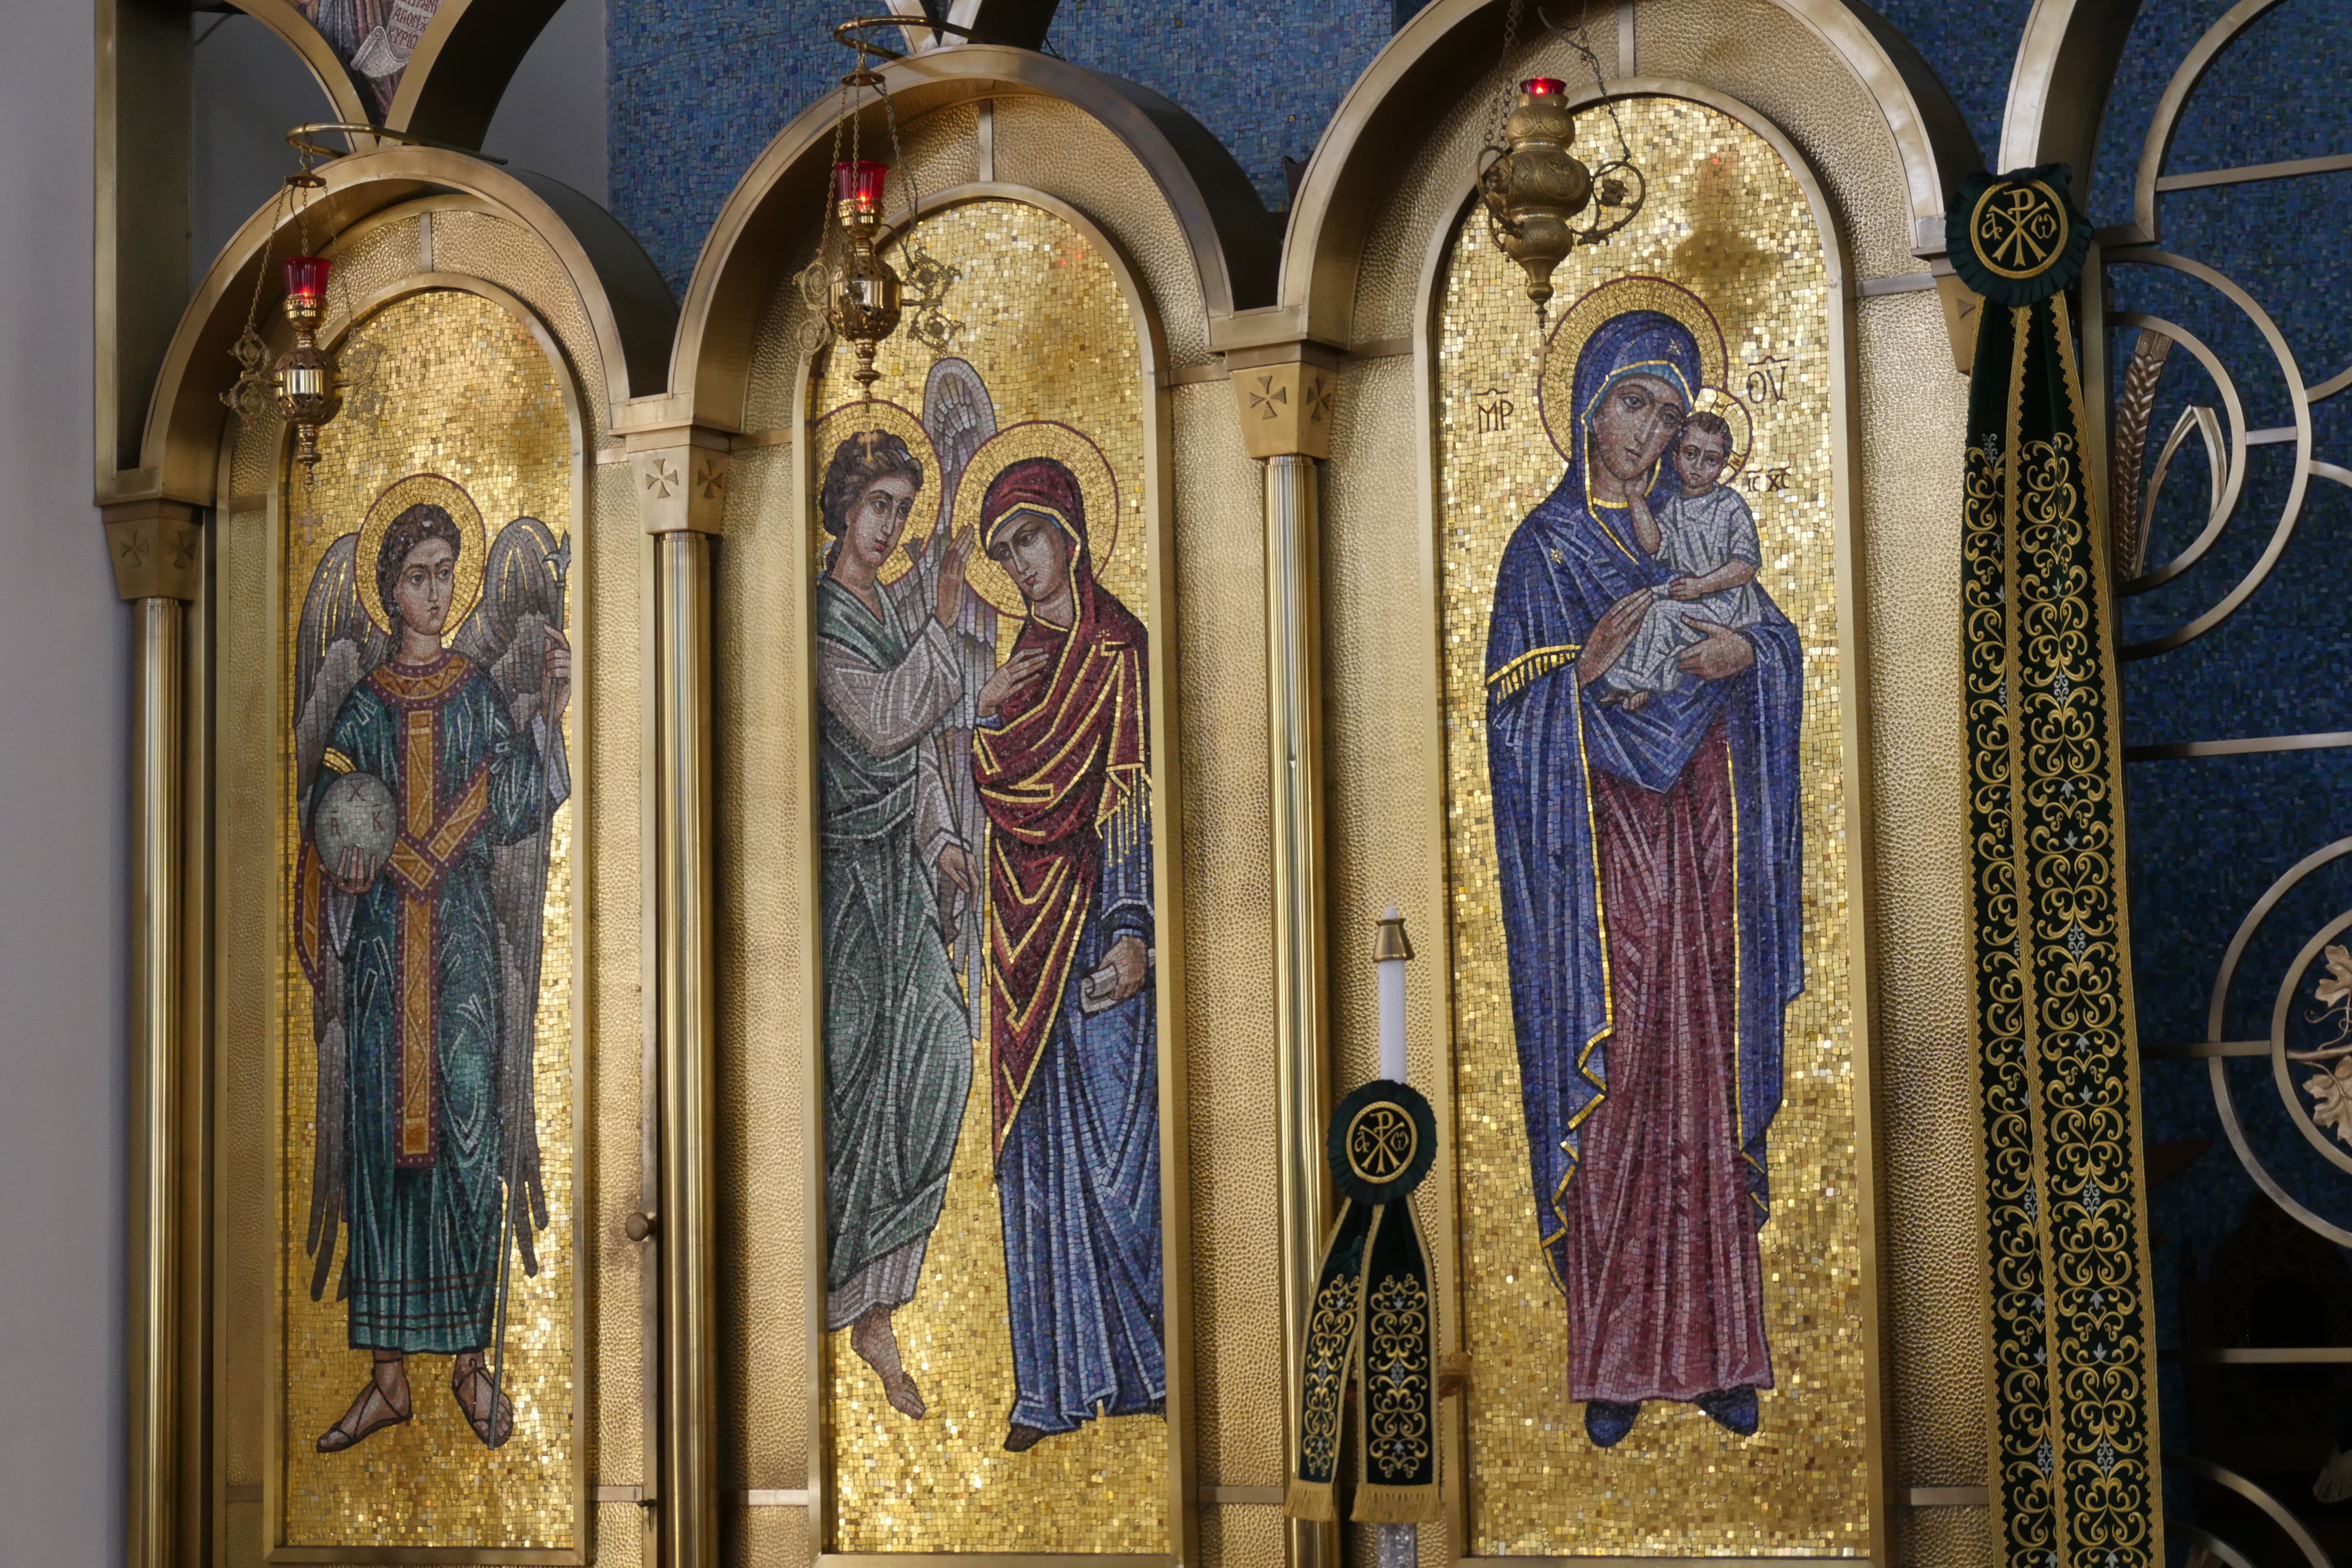 Photo with an icon of the Archangel Gabriel (far left) Annunciation of the Virgin Mary (center) and The Madonna with Baby Jesus (right) on the Icon screen at Annunciation Greek Orthodox Cathedral, Atlanta, GA